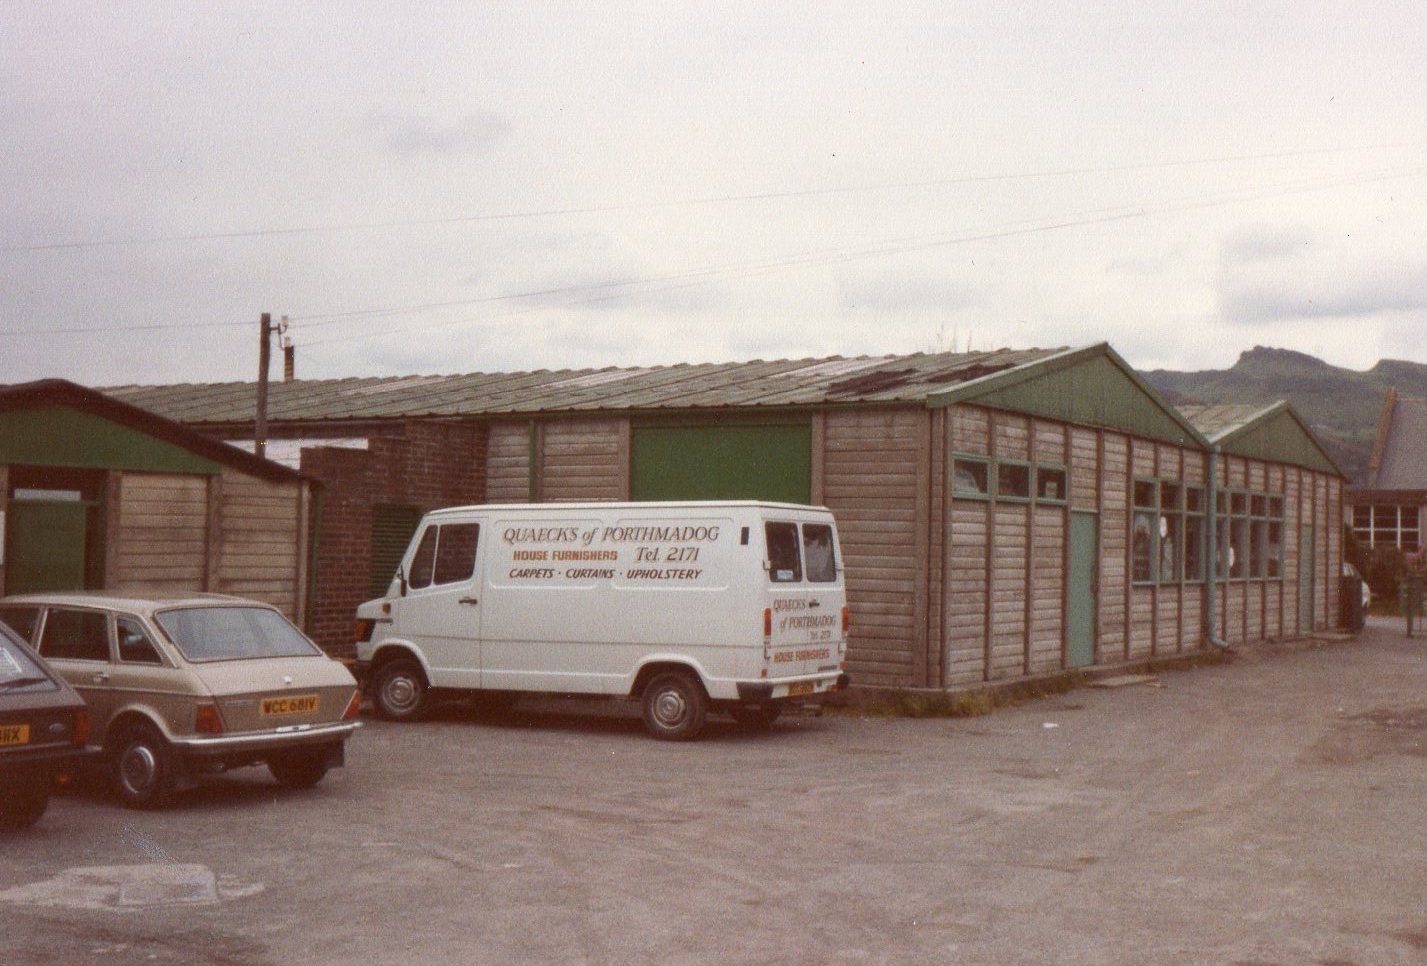 Old Quaeck's Furnishers van parked outside factory